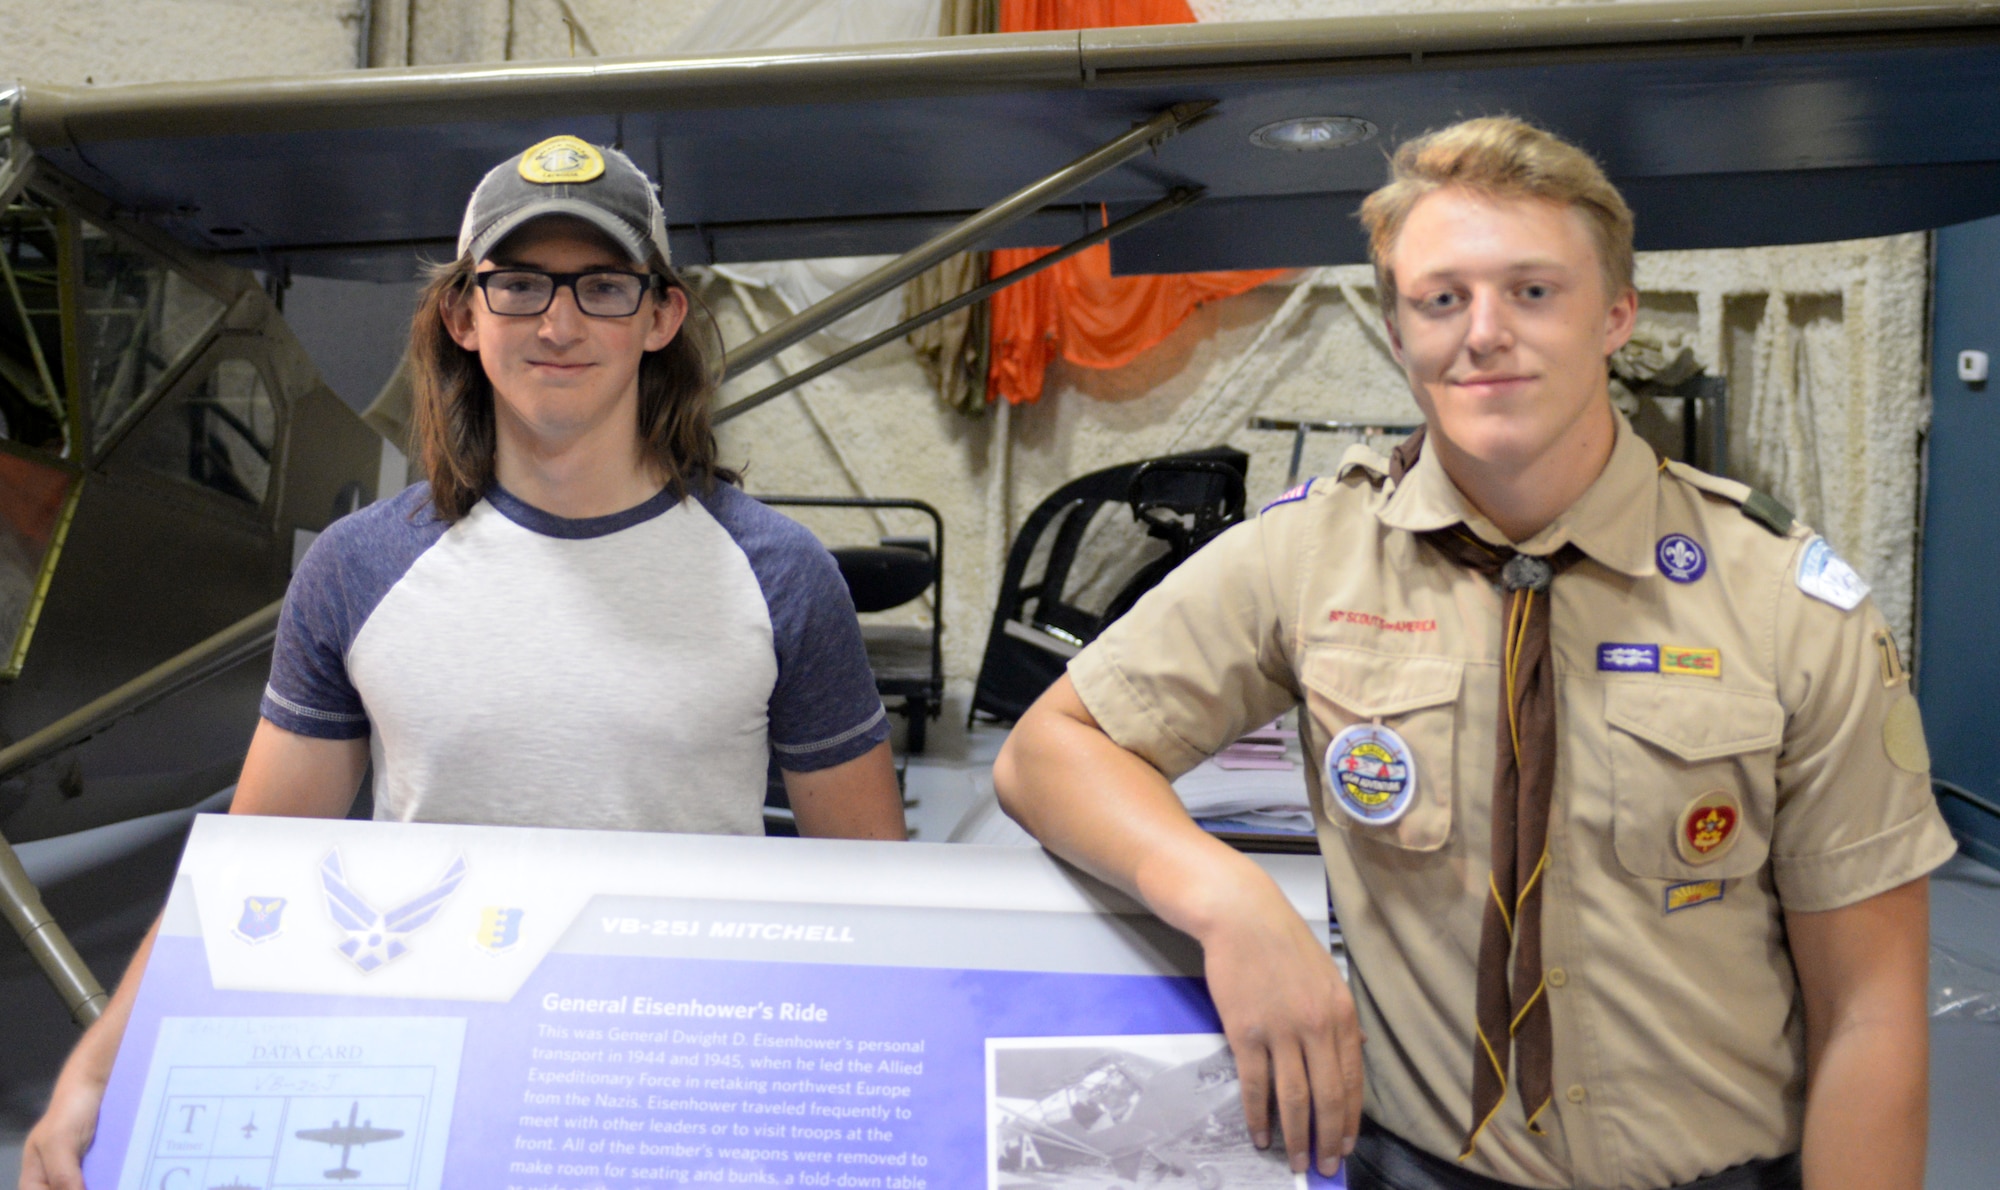 Andrew Worley and Ryan Ahrenstorff, eagle scouts with Troop 72 from Rapid City, stand next to a sign they assembled in Box Elder, S.D., Sept. 23, 2017. Worley and Ahrenstorff helped the South Dakota Air and Space Museum’s Adopt-a-Plane Program which was established to keep the static displays in pristine condition for future generations to enjoy. (U.S. Air Force photo by Airman 1st Class Thomas Karol)